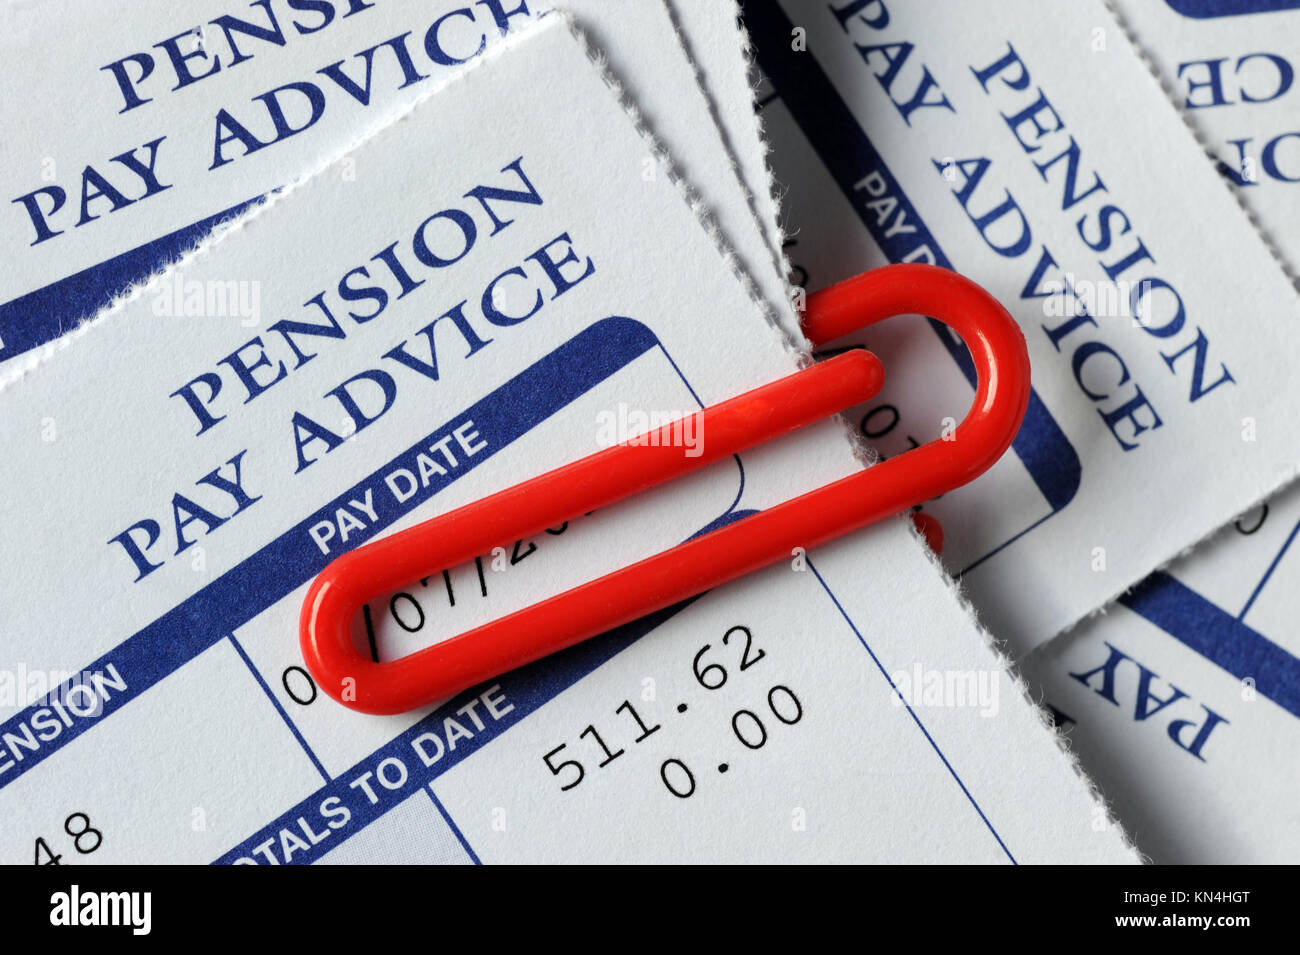 COMPANY PENSION PAY ADVICE SLIPS WITH RED PAPER CLIP RE WORKPLACE PENSIONS COMPANY SCHEMES PENSIONS UK Stock Photo